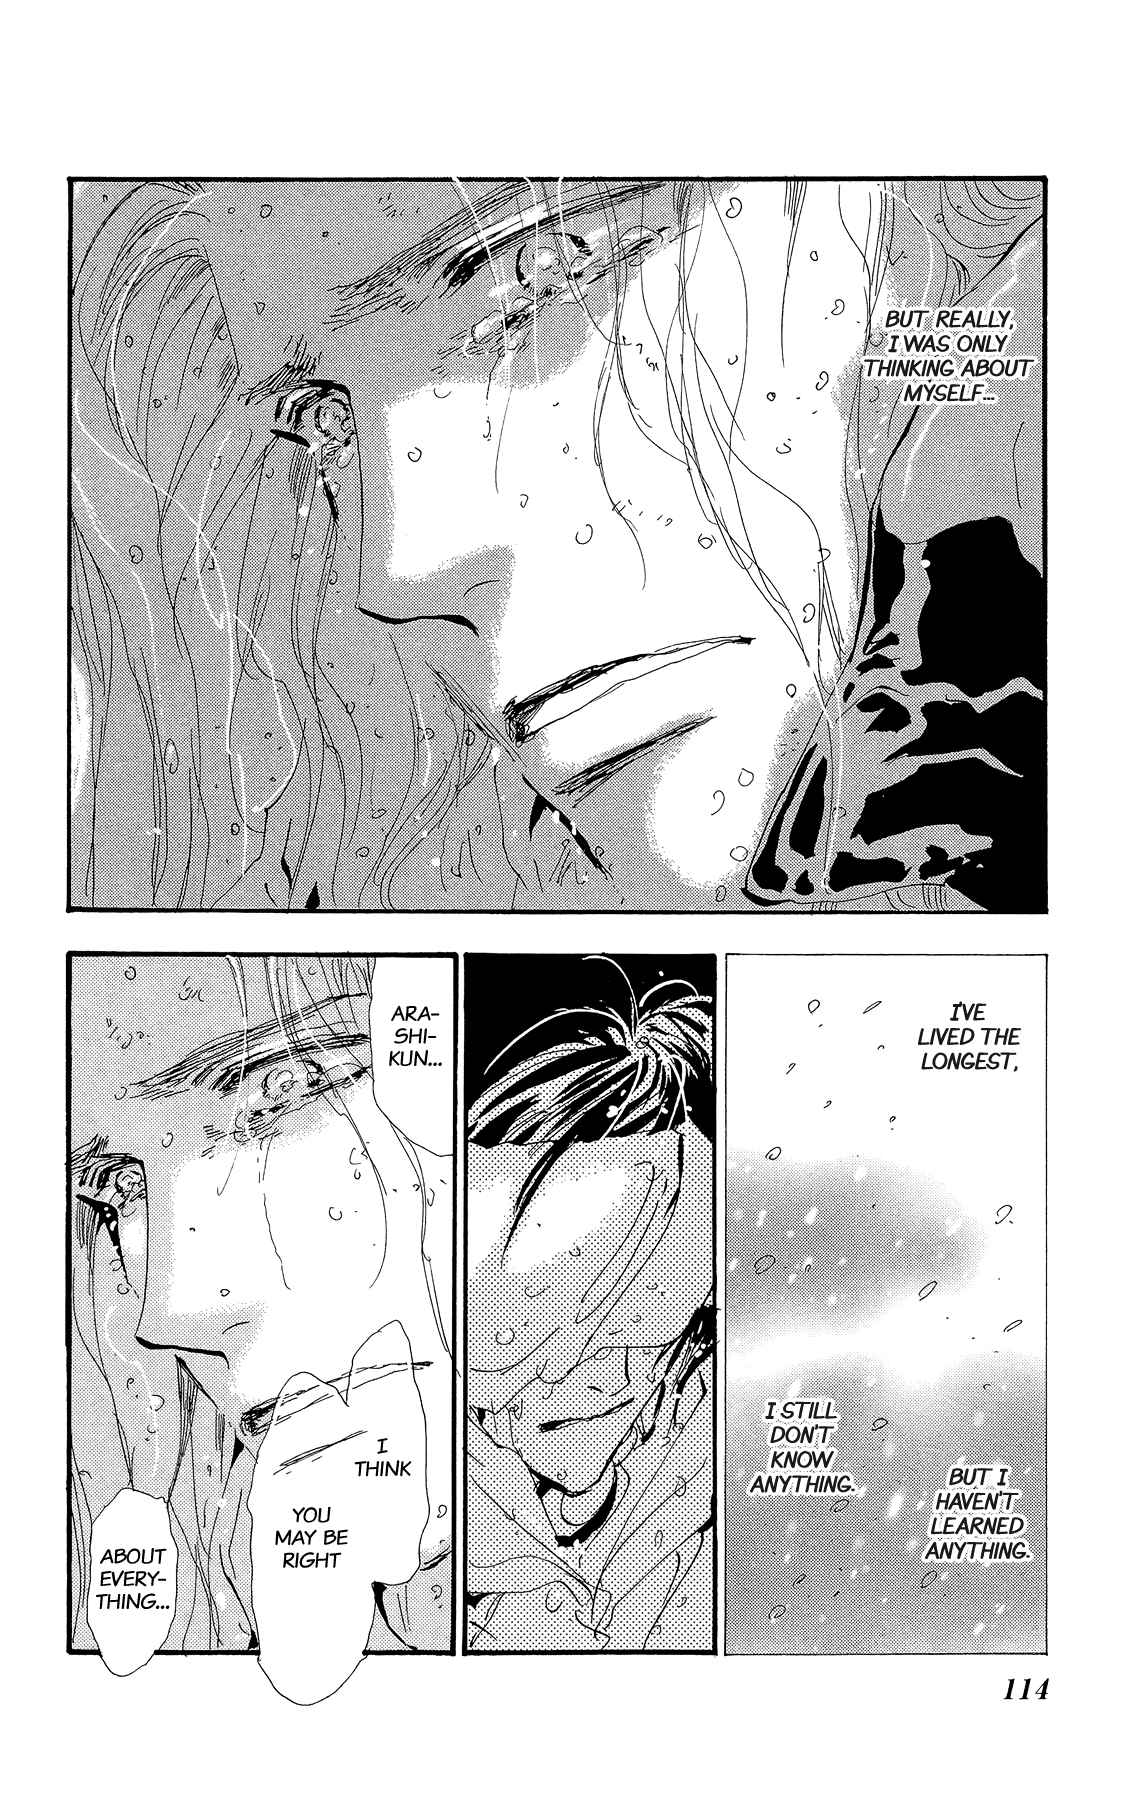 7 Seeds Vol. 33 Ch. 170 Sky Chapter 7 [Life]